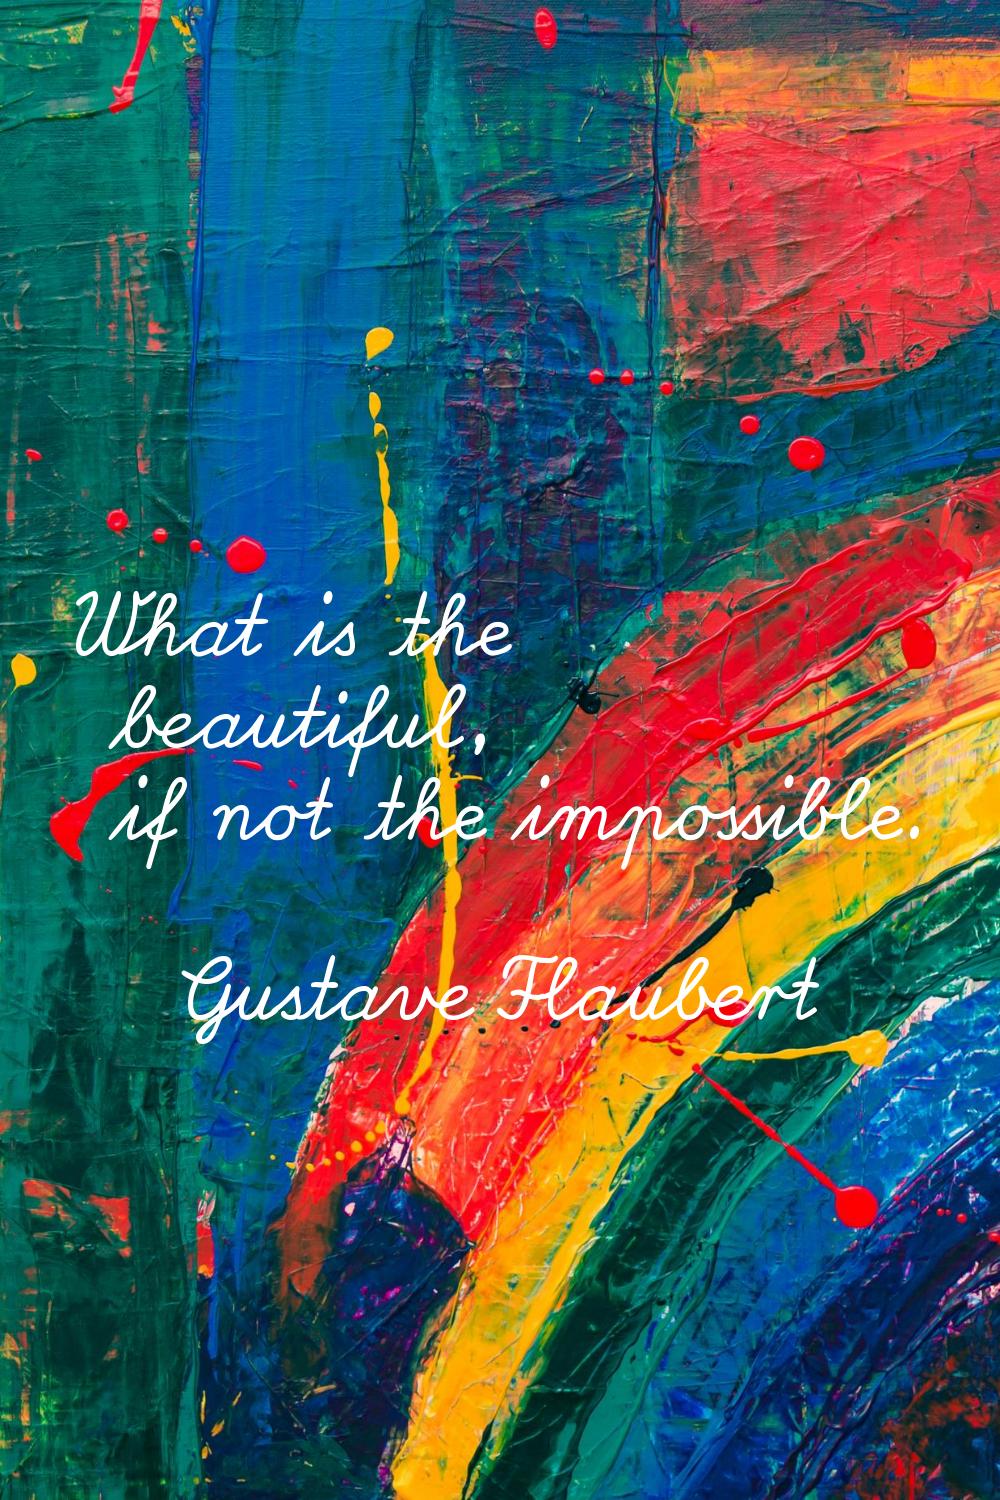 What is the beautiful, if not the impossible.